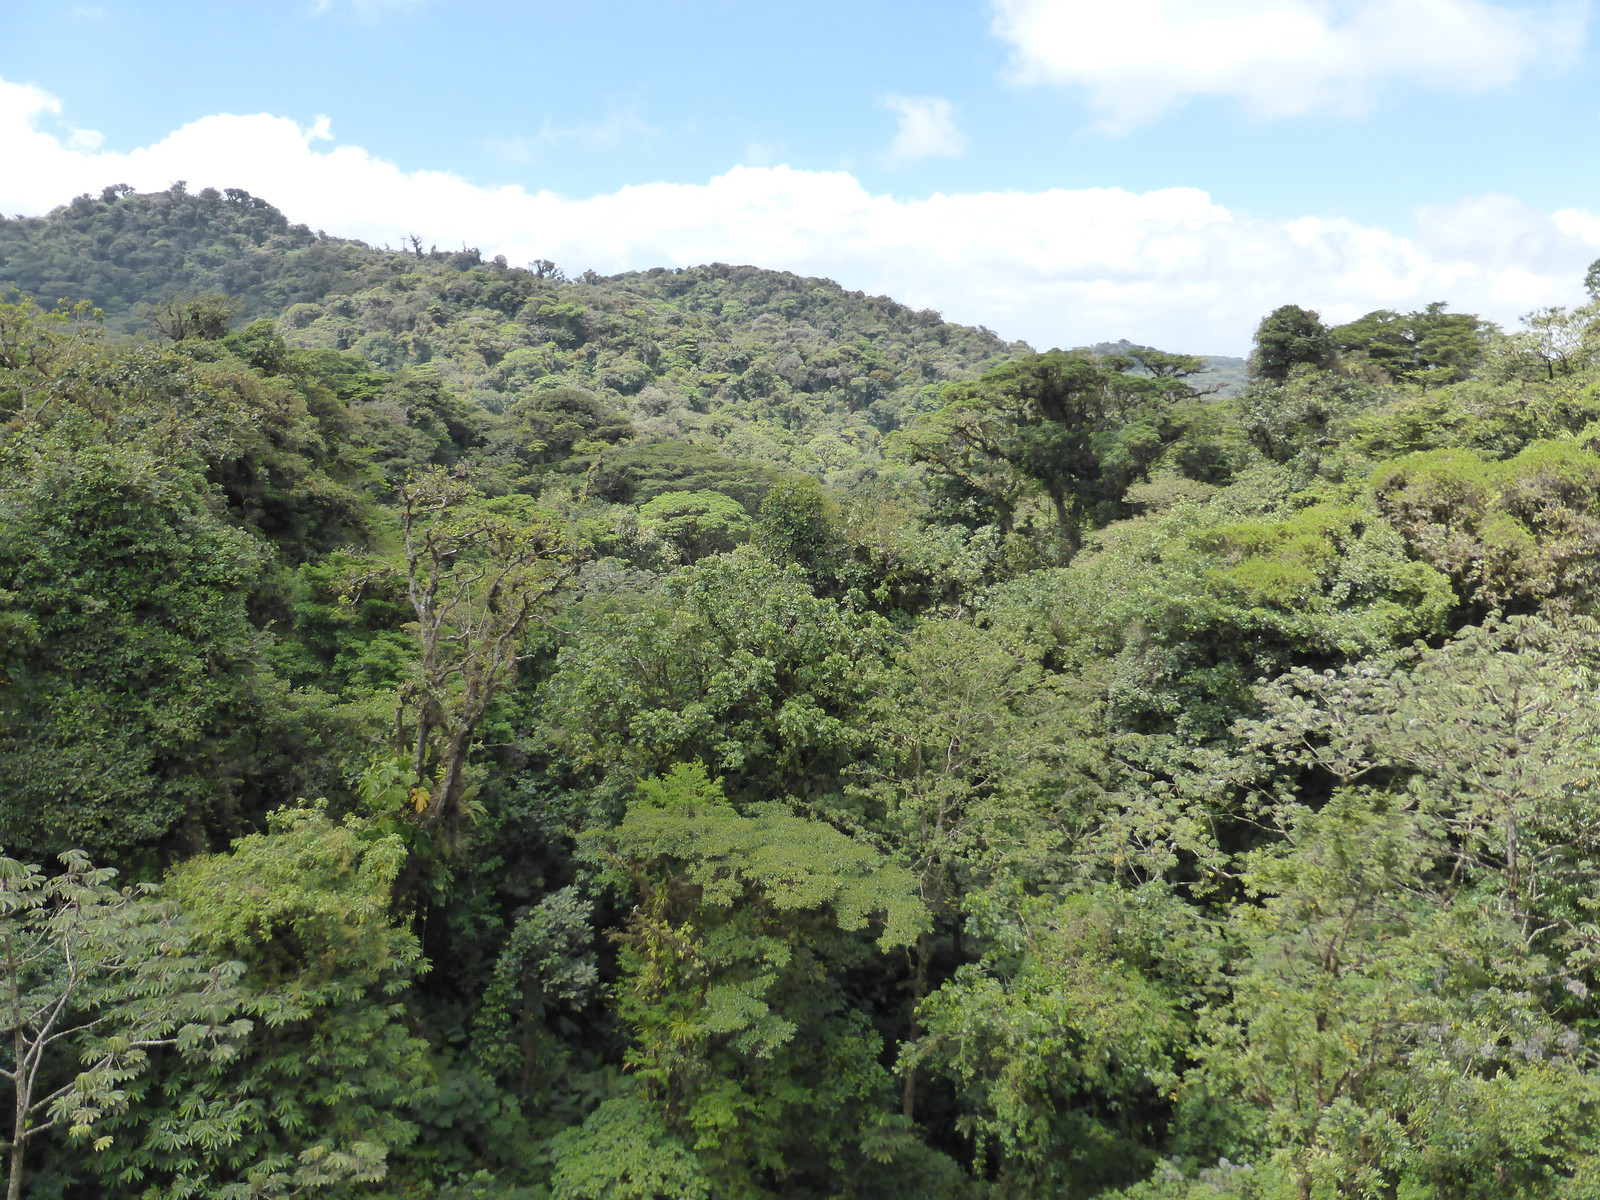 The view from the canopy walk